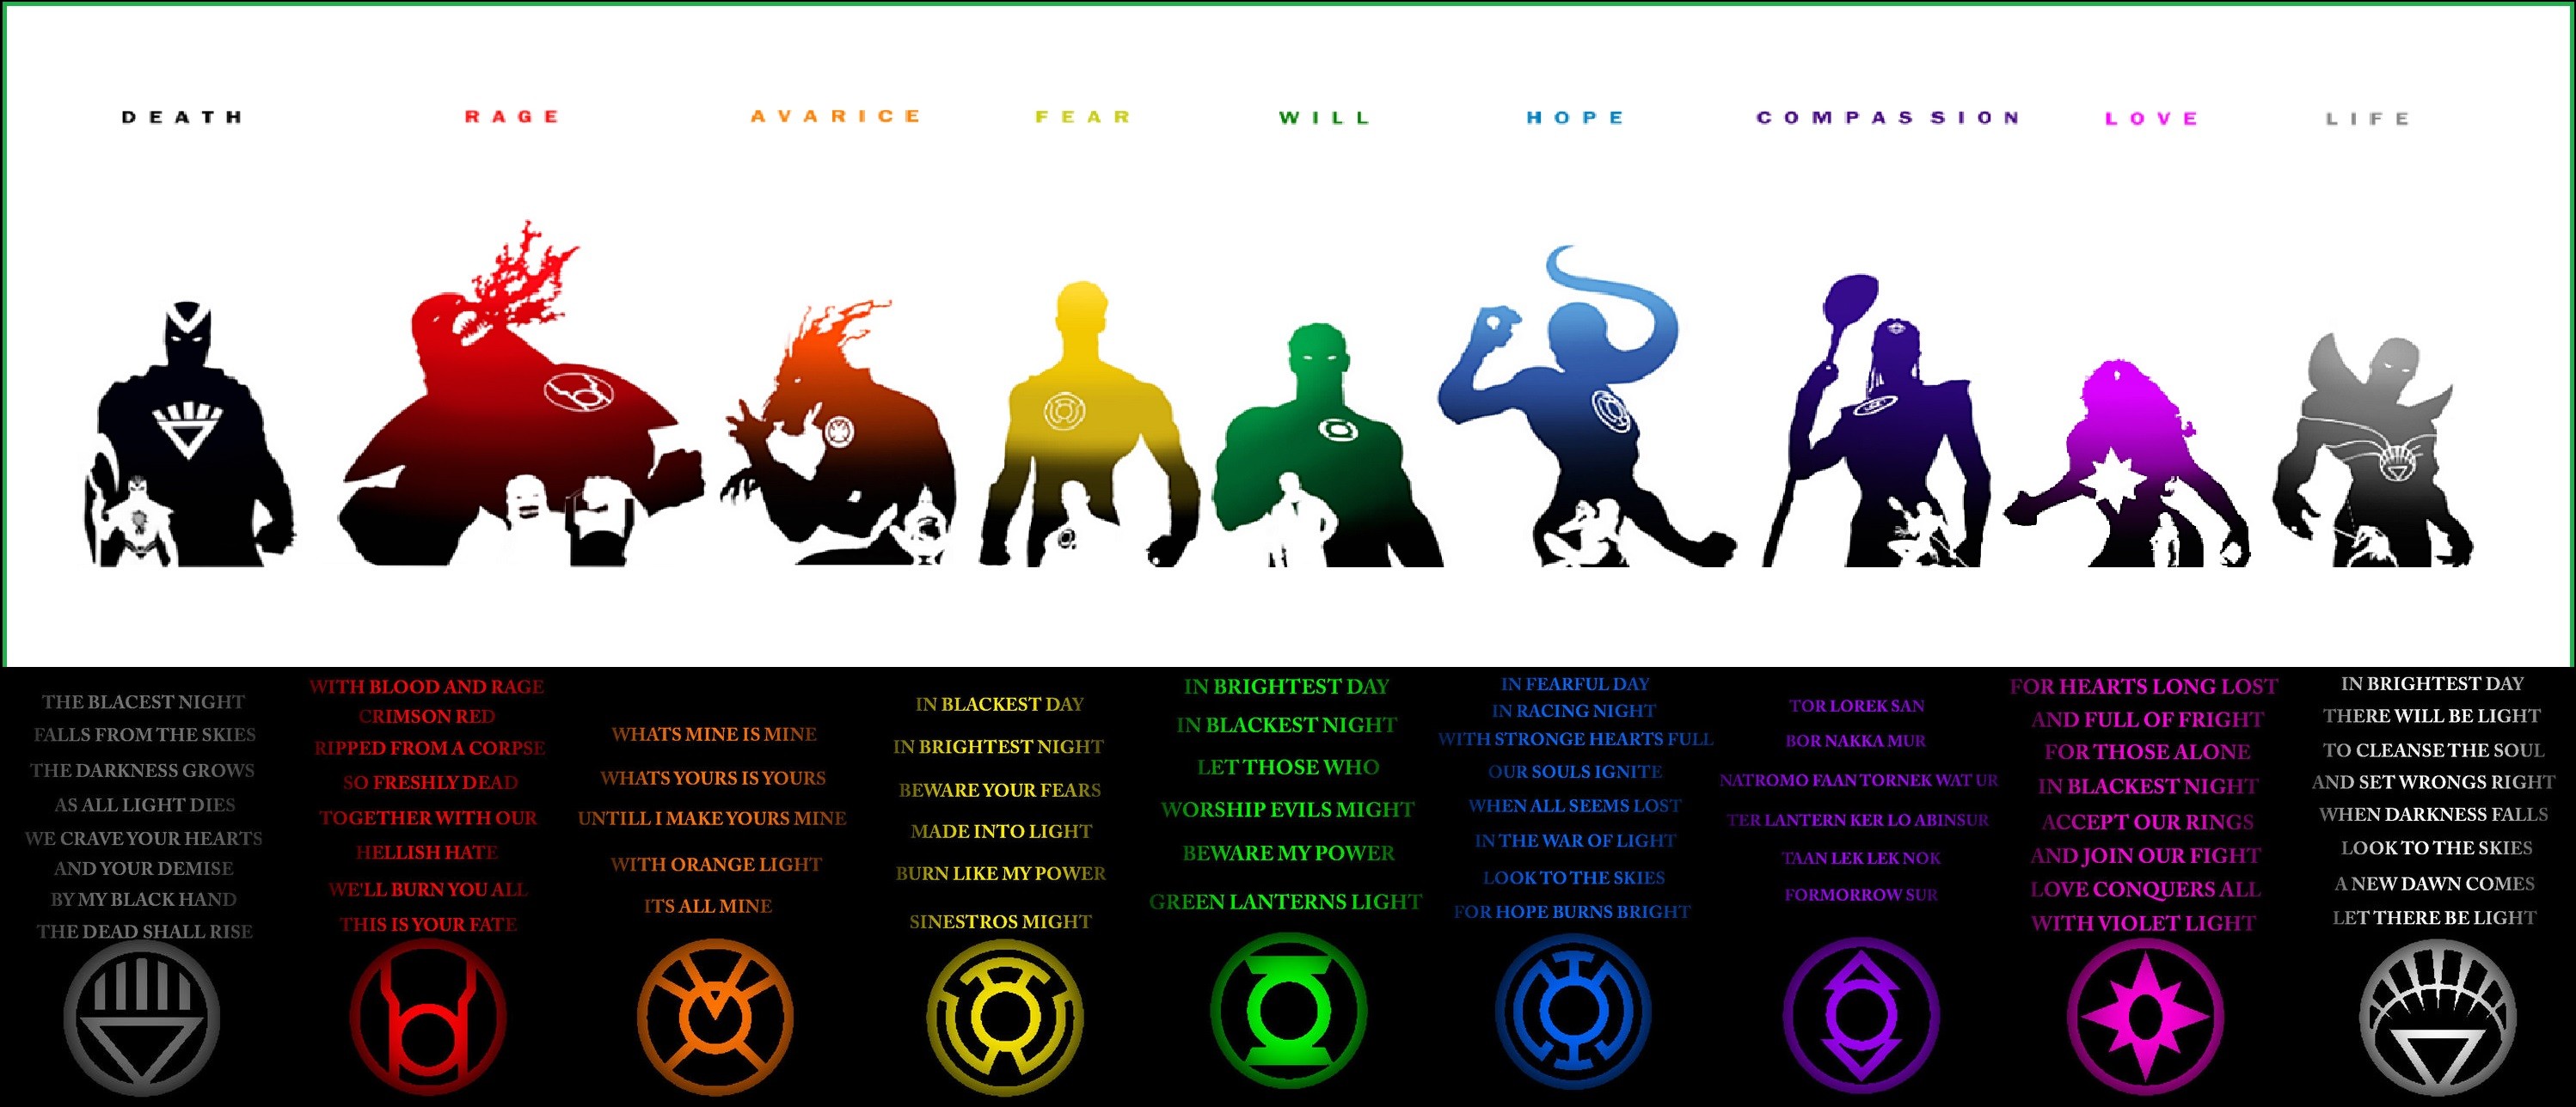 2996x1288 The Entire Lantern Corps. No Caption Provided